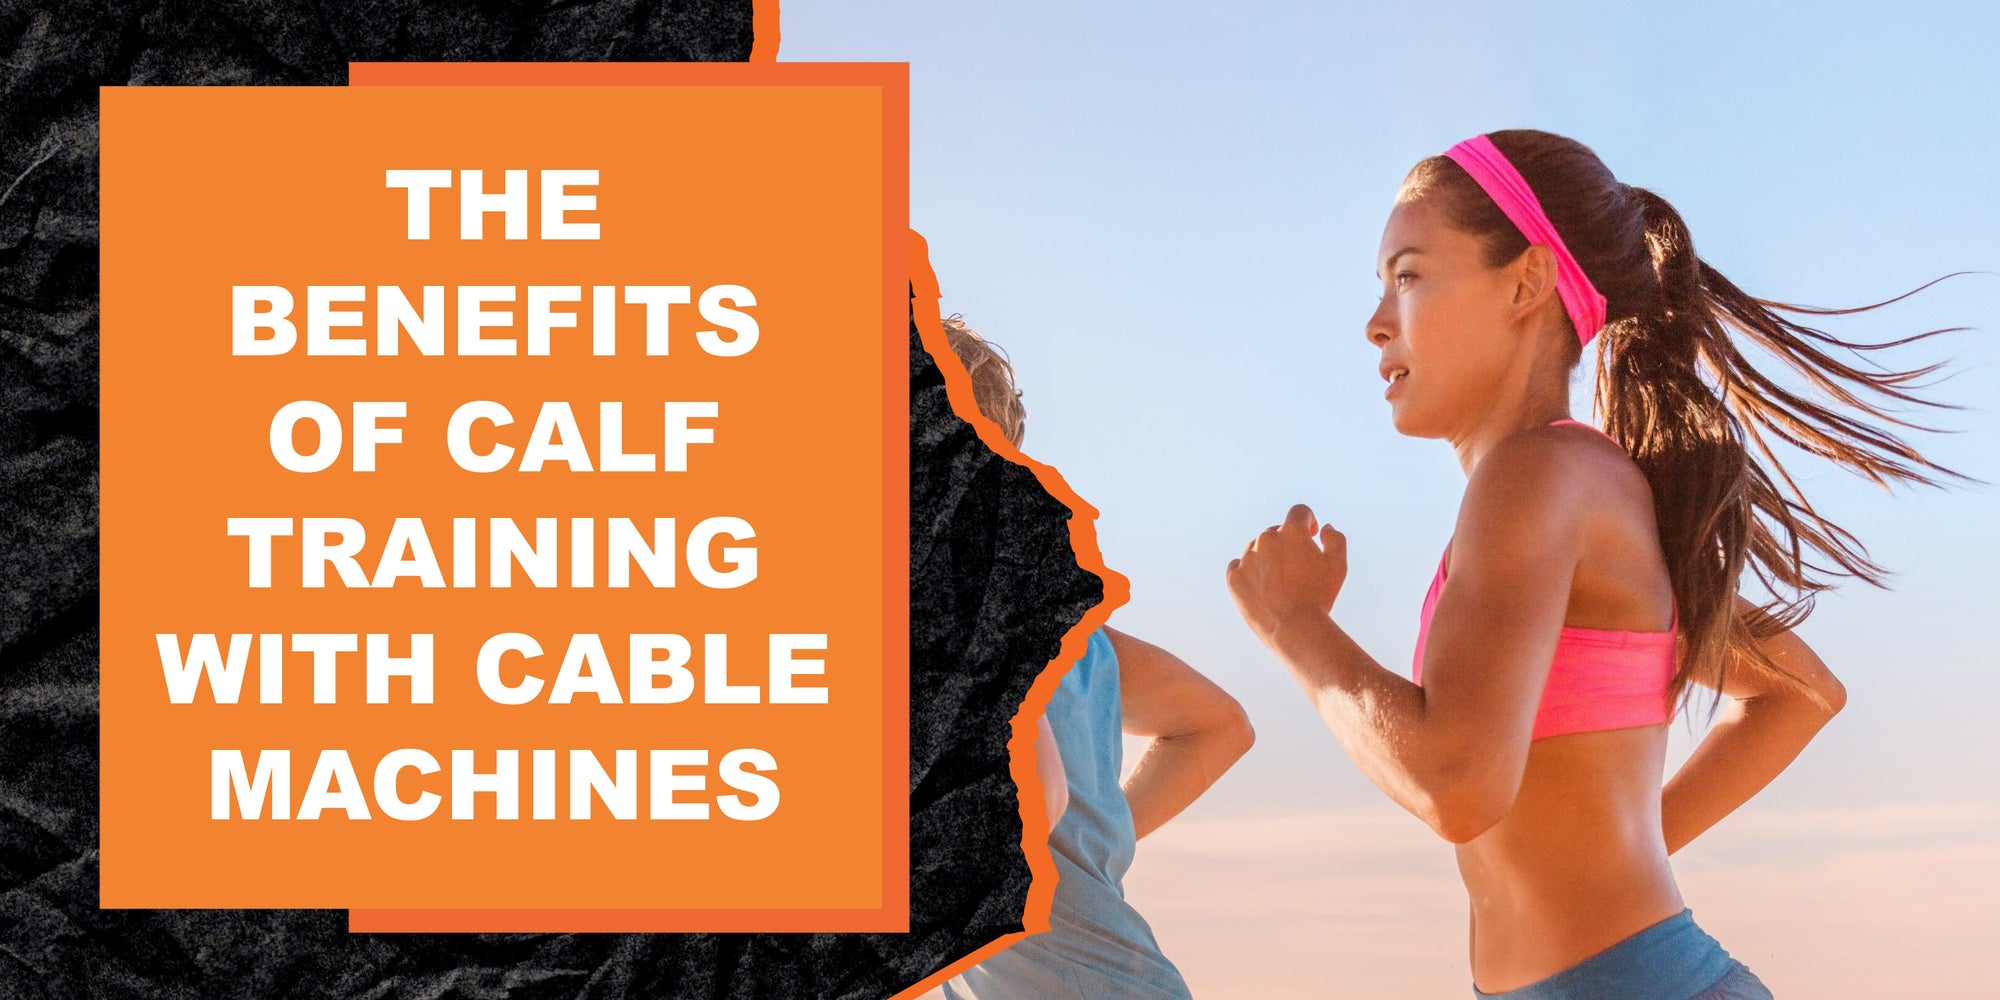 The Benefits of Calf Training with Cable Machines